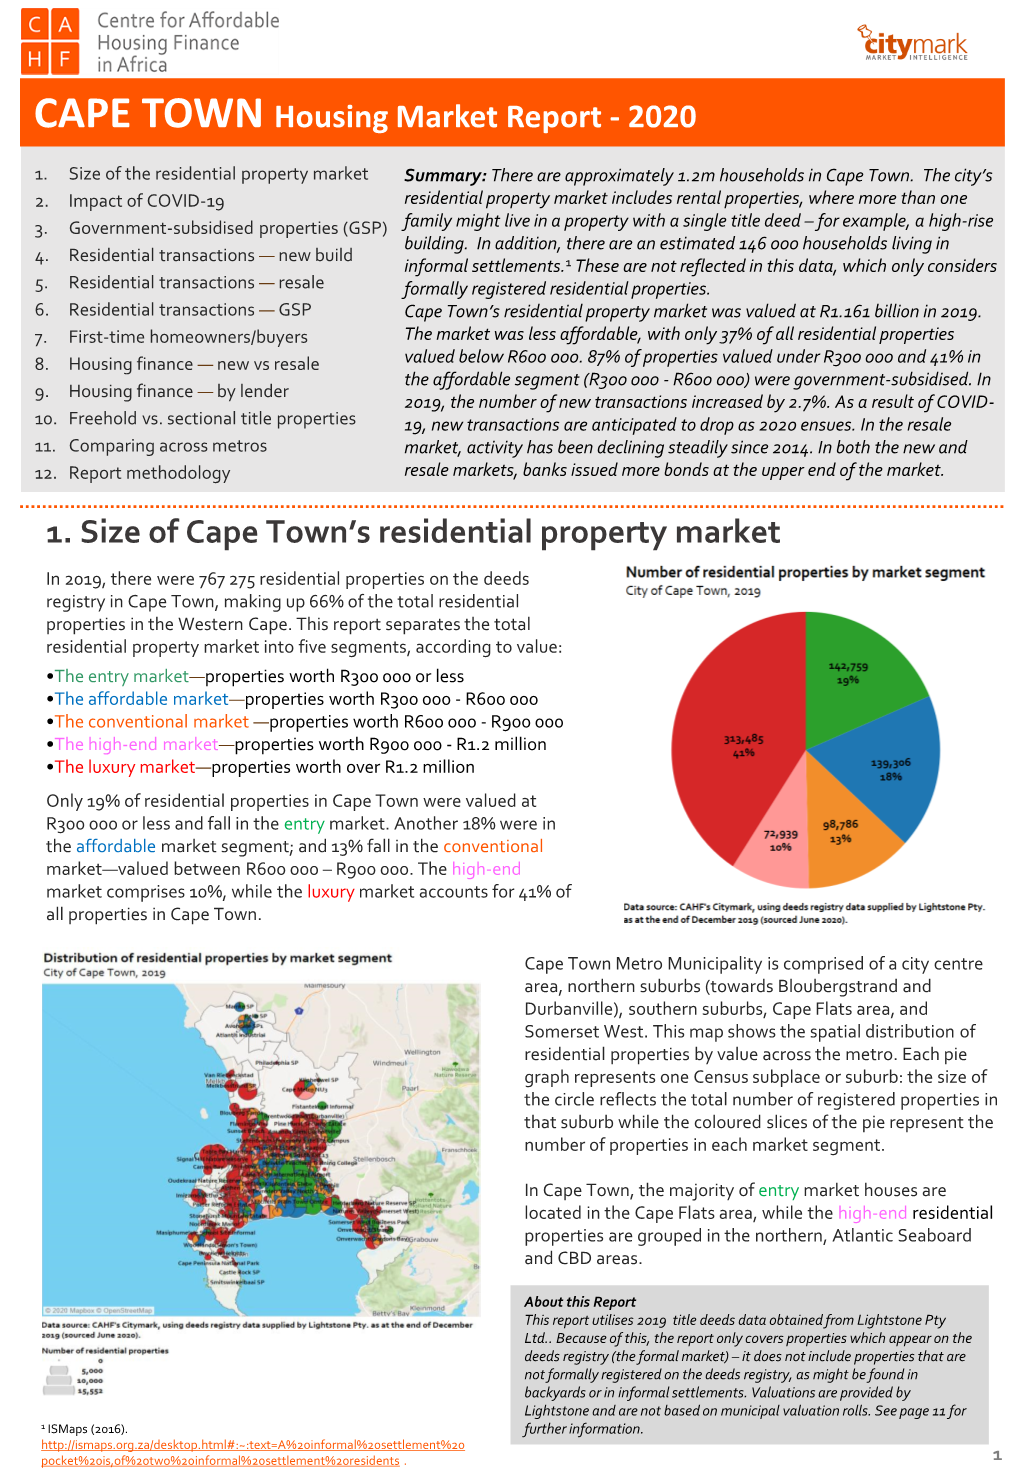 2020 1. Size of Cape Town's Residential Property Market